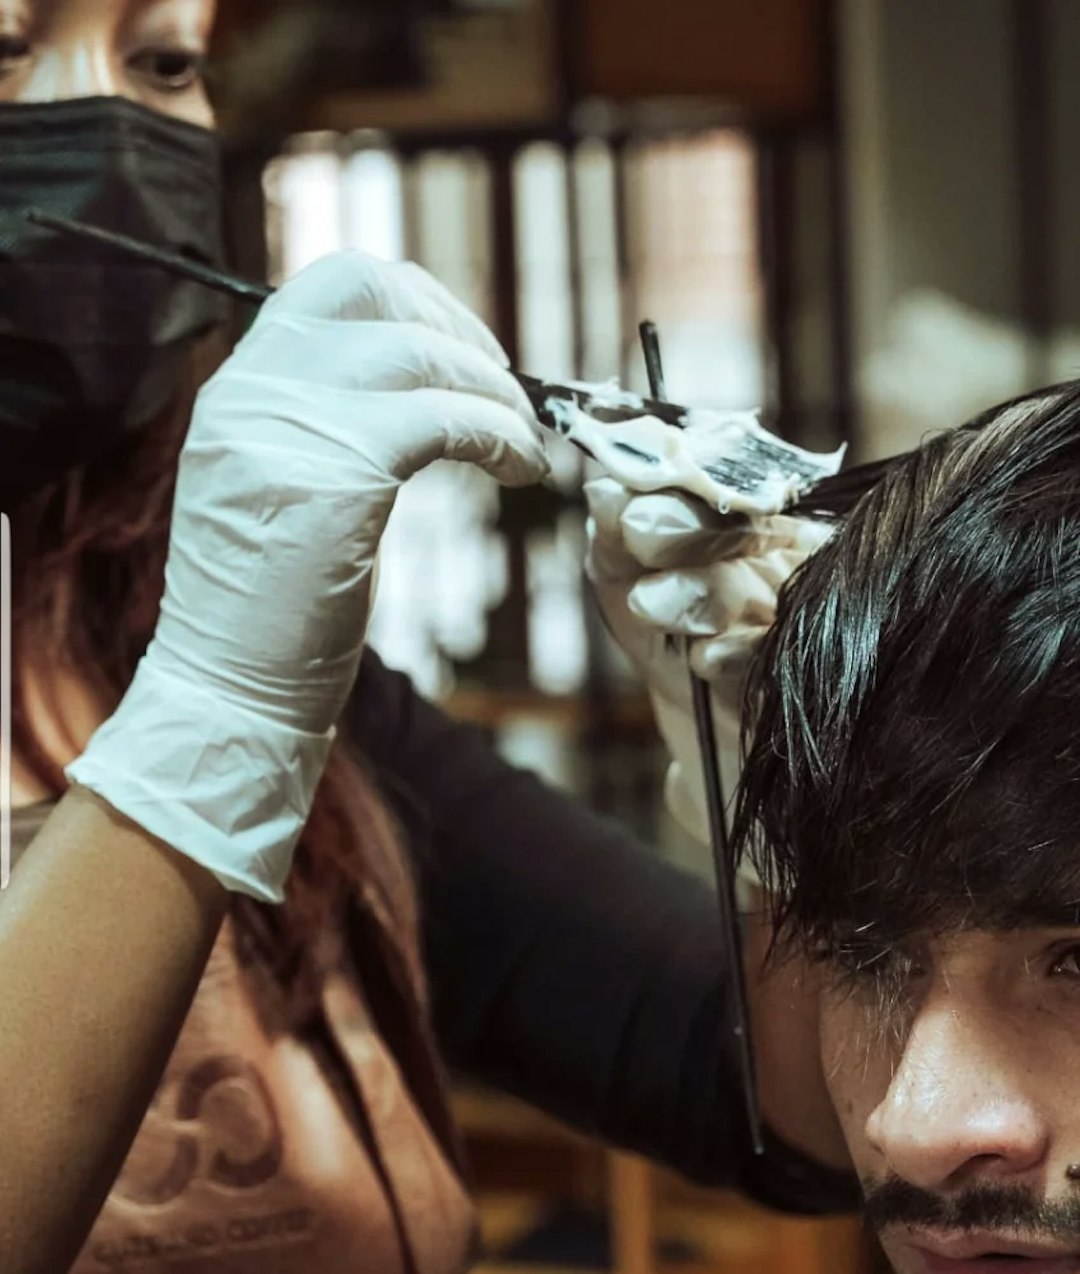 Barber coloring hair of a customer